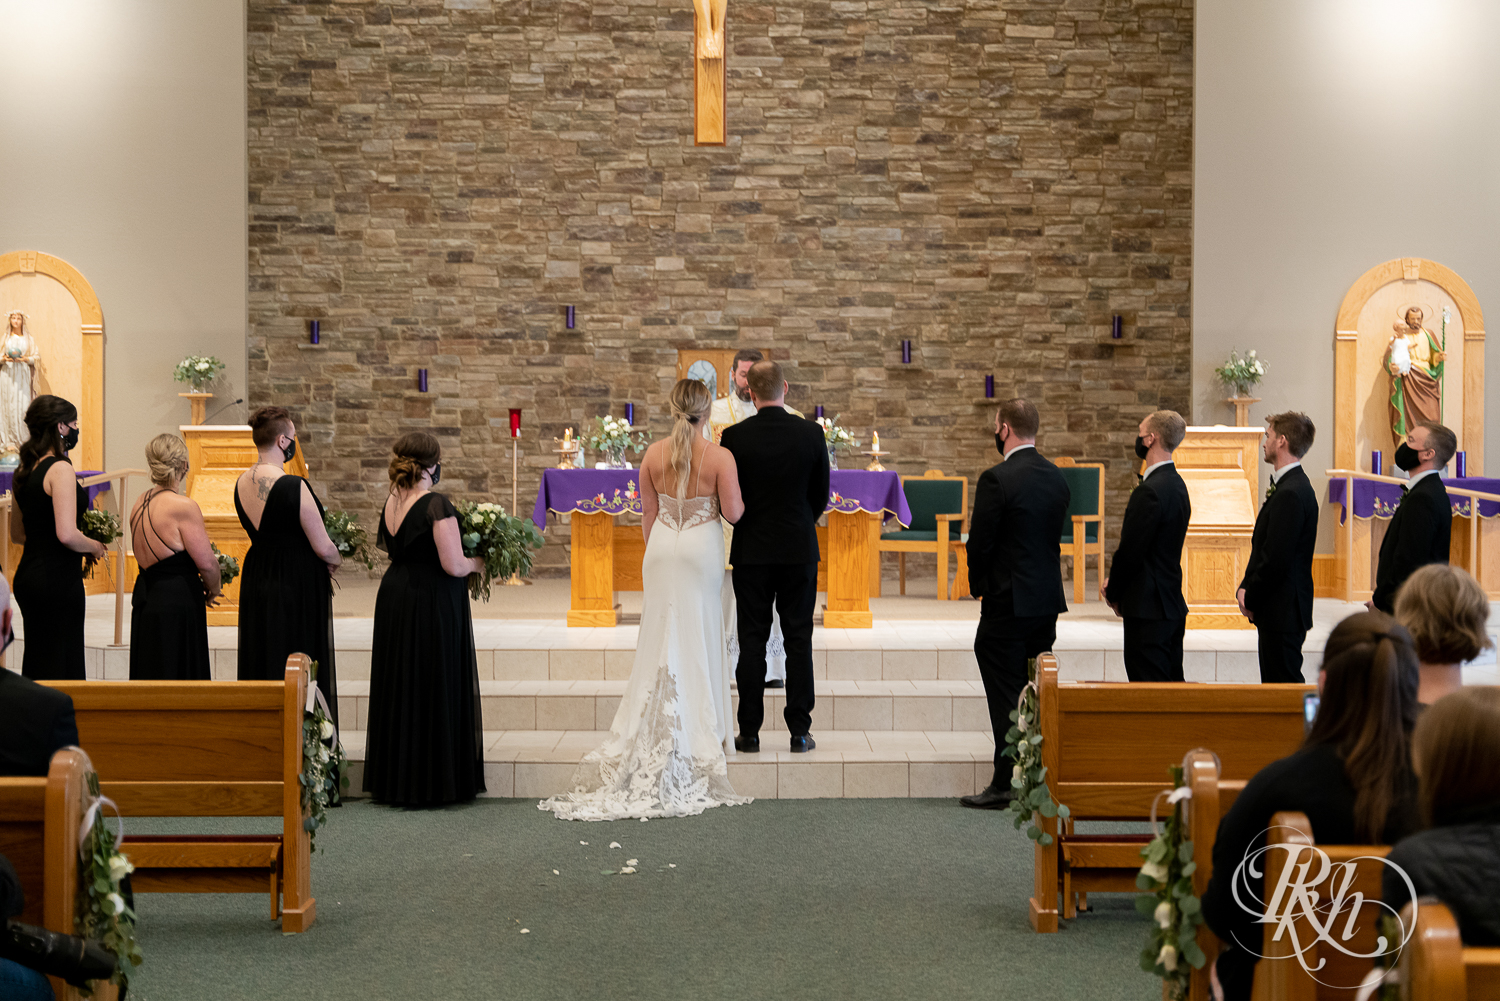 Bride and groom stand in front of pastor in church wedding ceremony in Faribault, Minnesota.